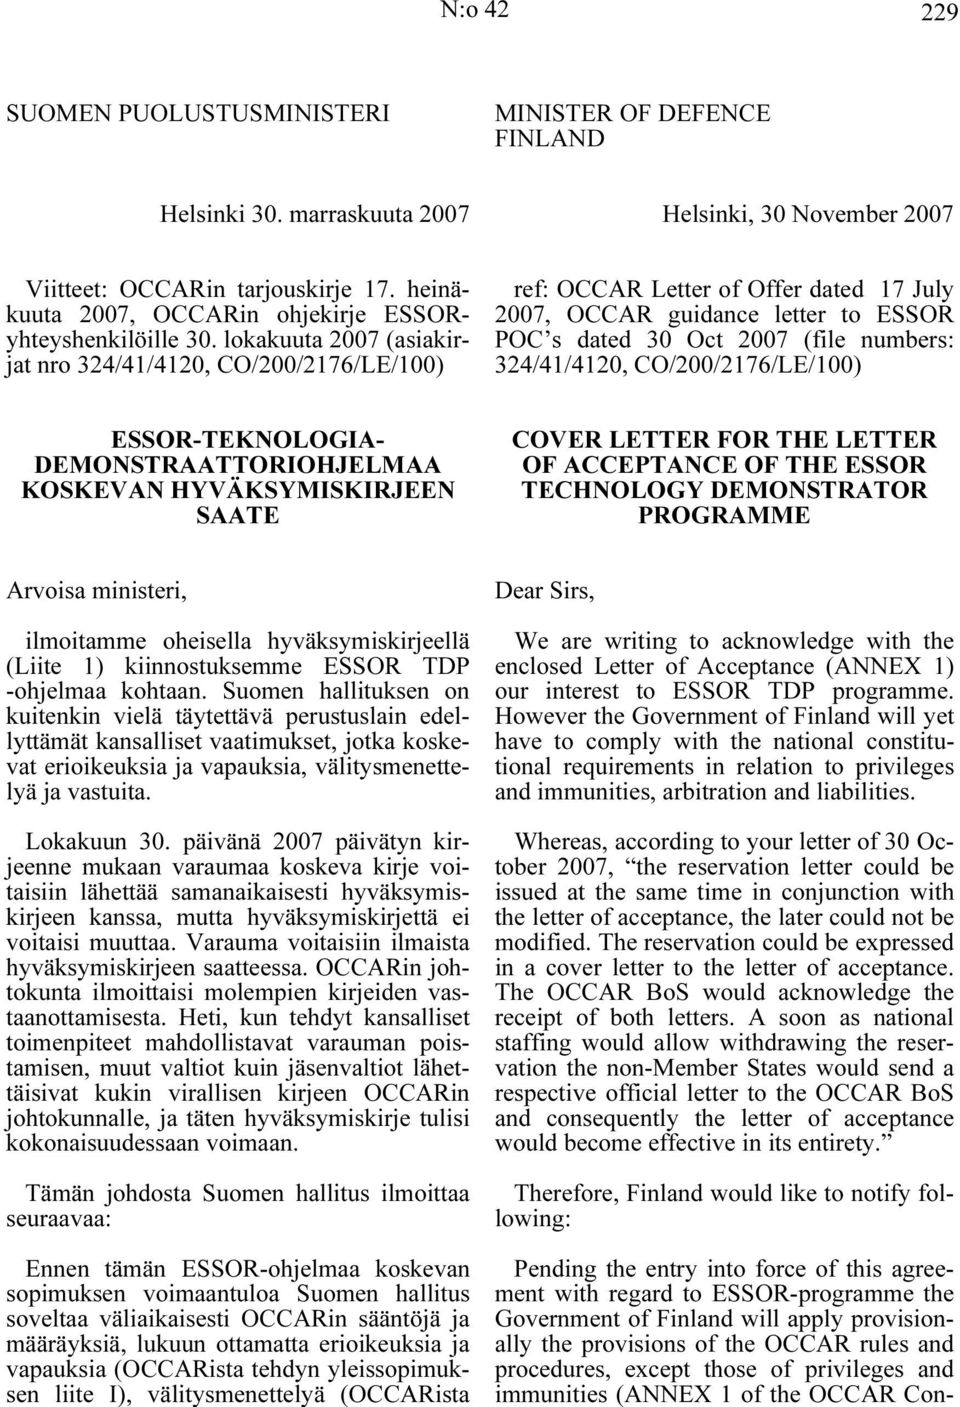 lokakuuta 2007 (asiakirjat nro 324/41/4120, CO/200/2176/LE/100) ref: OCCAR Letter of Offer dated 17 July 2007, OCCAR guidance letter to ESSOR POC s dated 30 Oct 2007 (file numbers: 324/41/4120,